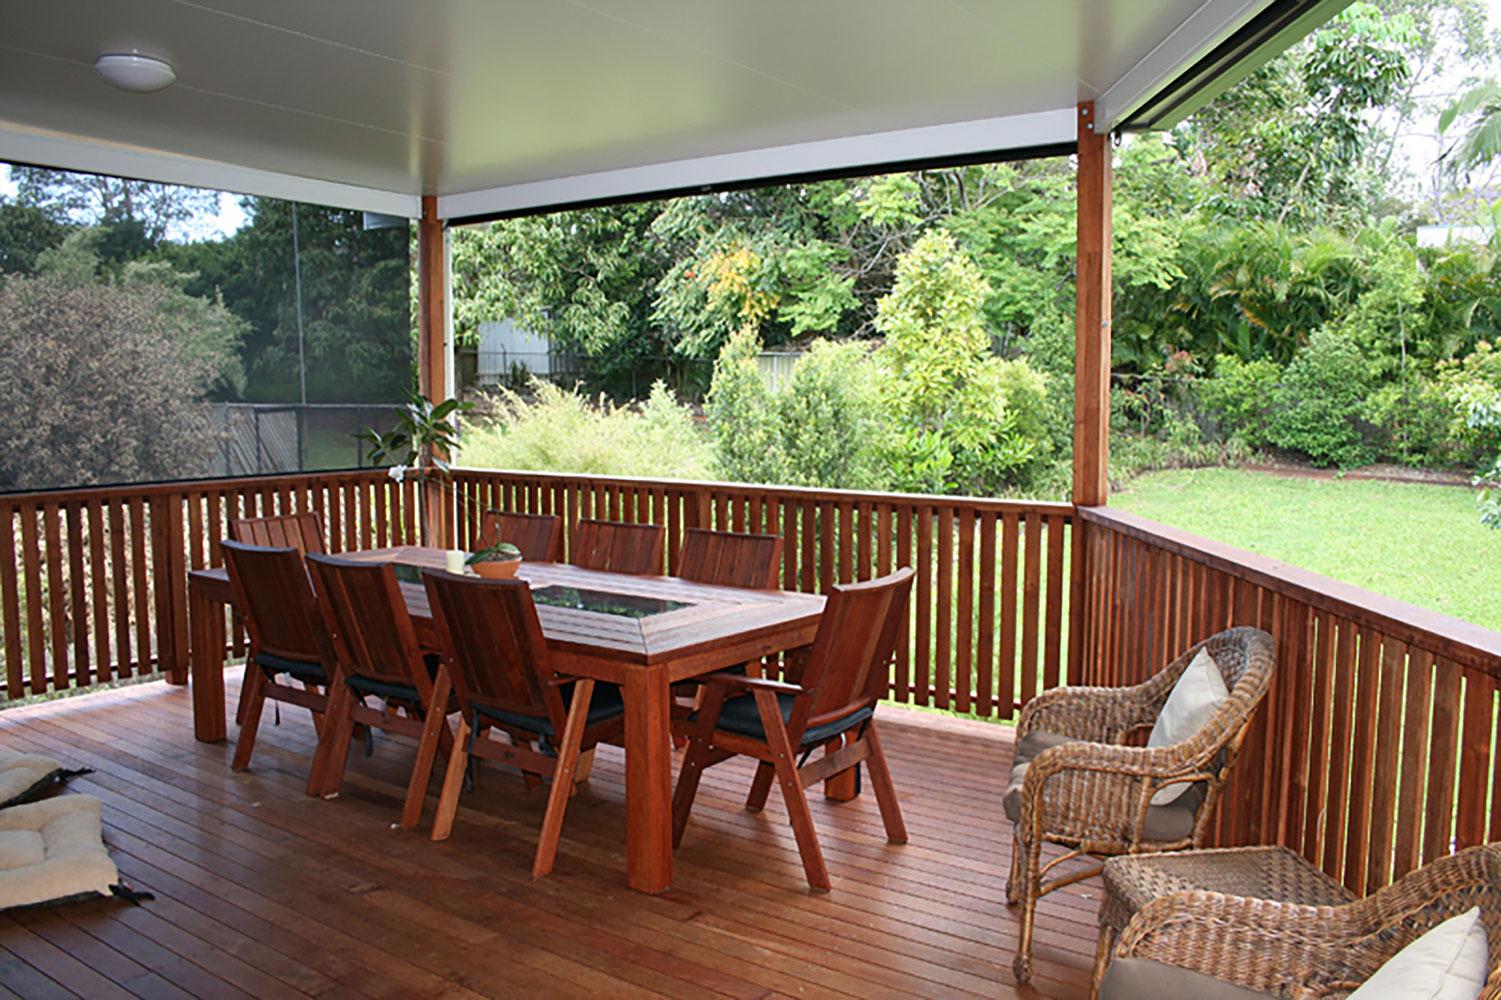 Thinking About Adding a Timber Patio?